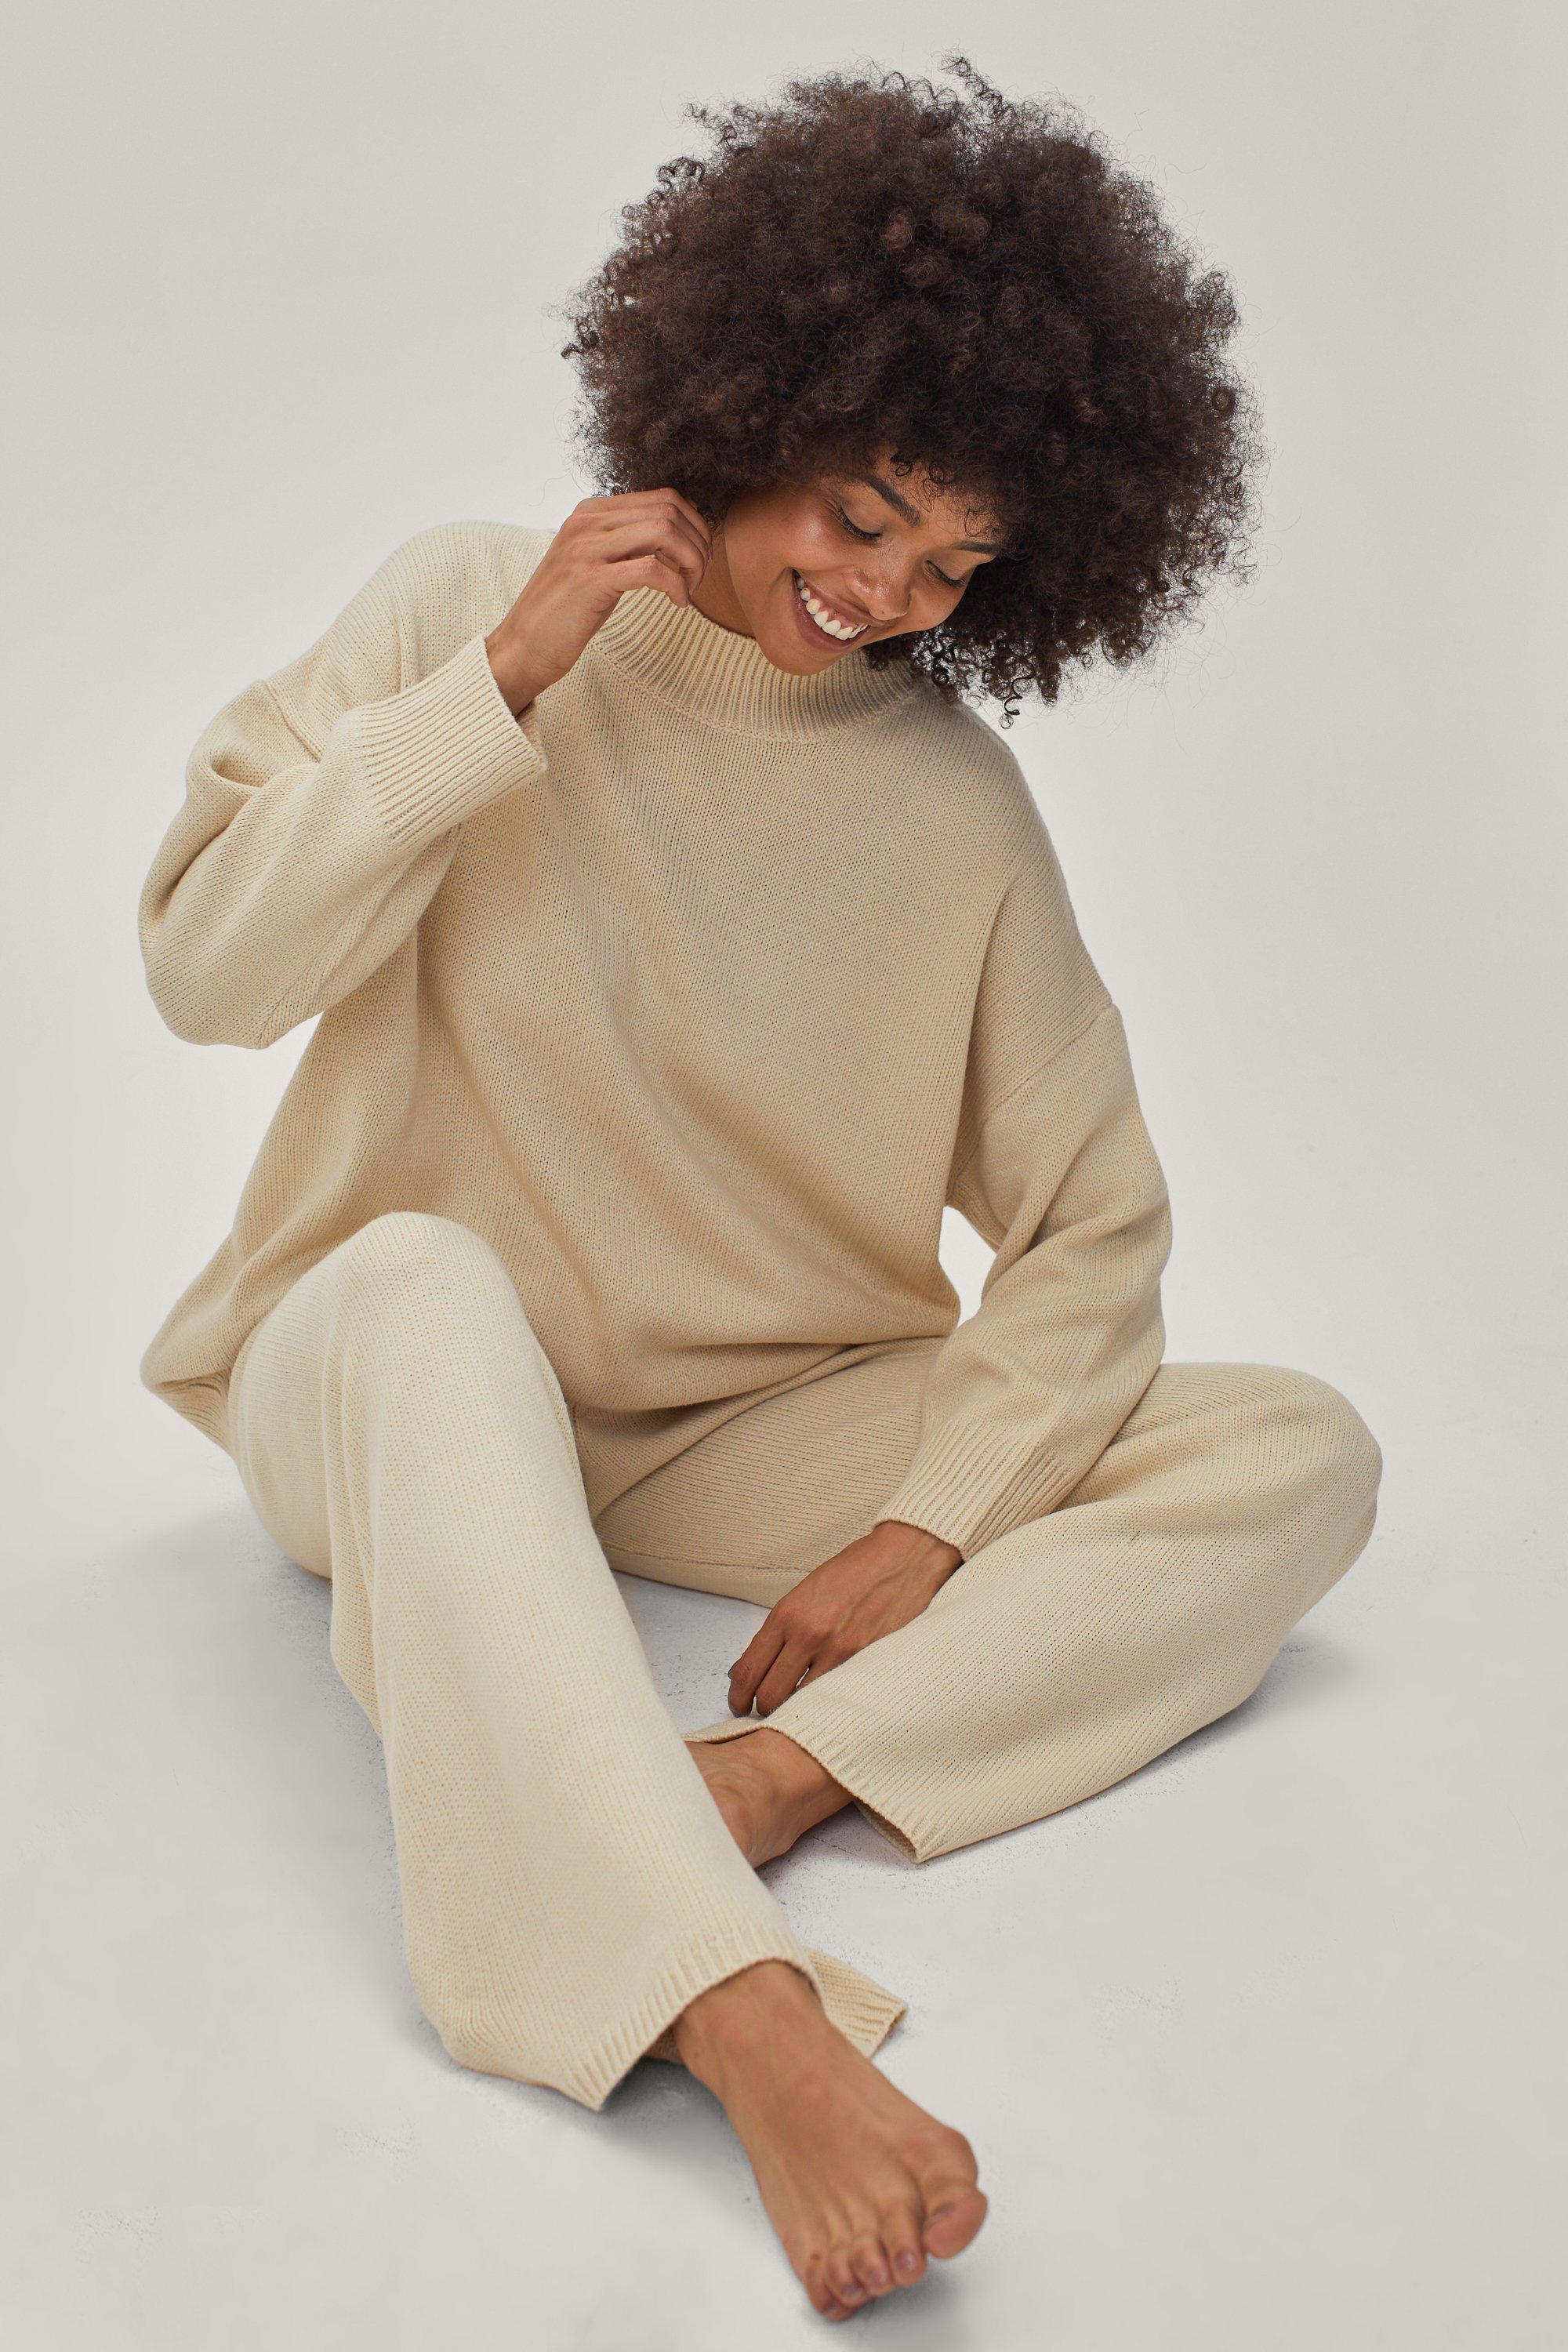 Knitted Pant & Oversized Sweater Set